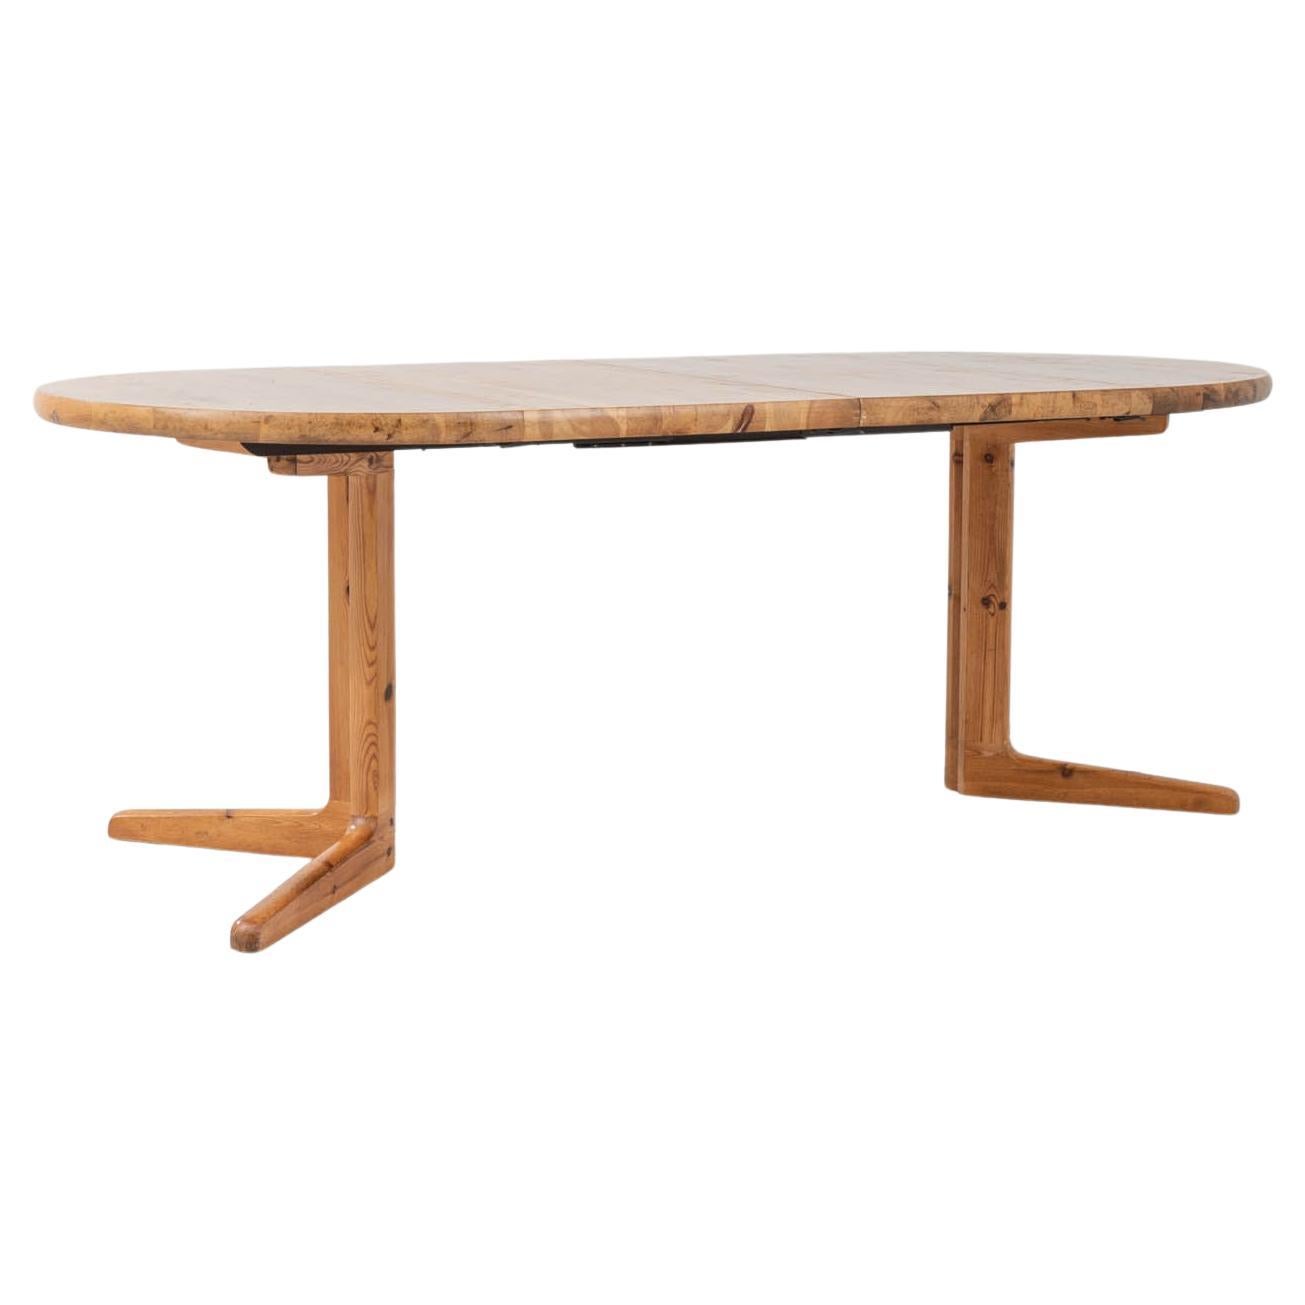 20th Century Danish Wooden Dining Table By Rainer Daumiller